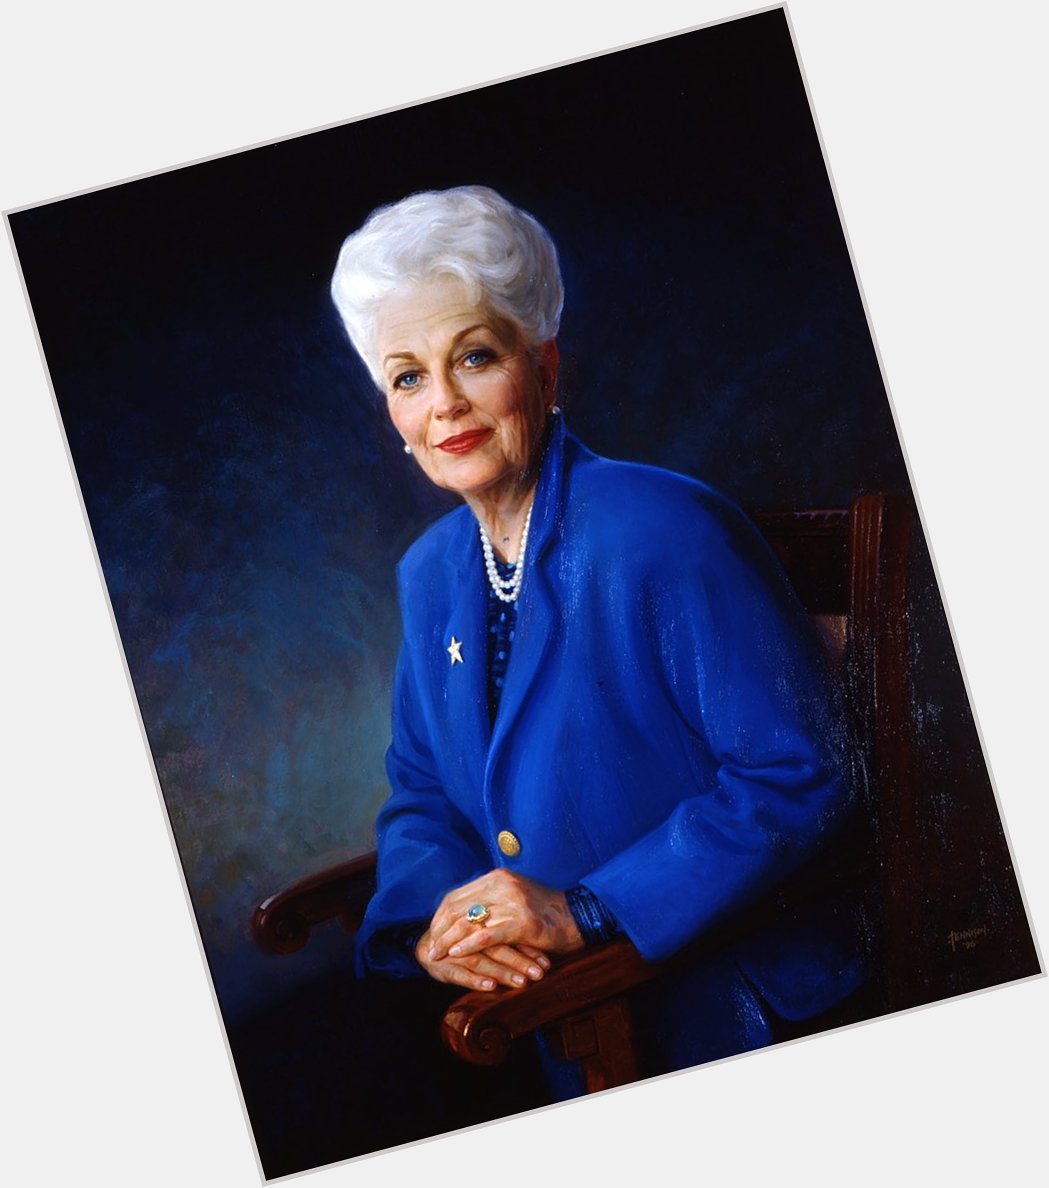 Happy Belated Heavenly Birthday to Ann Richards who had been born on Sept. 1 